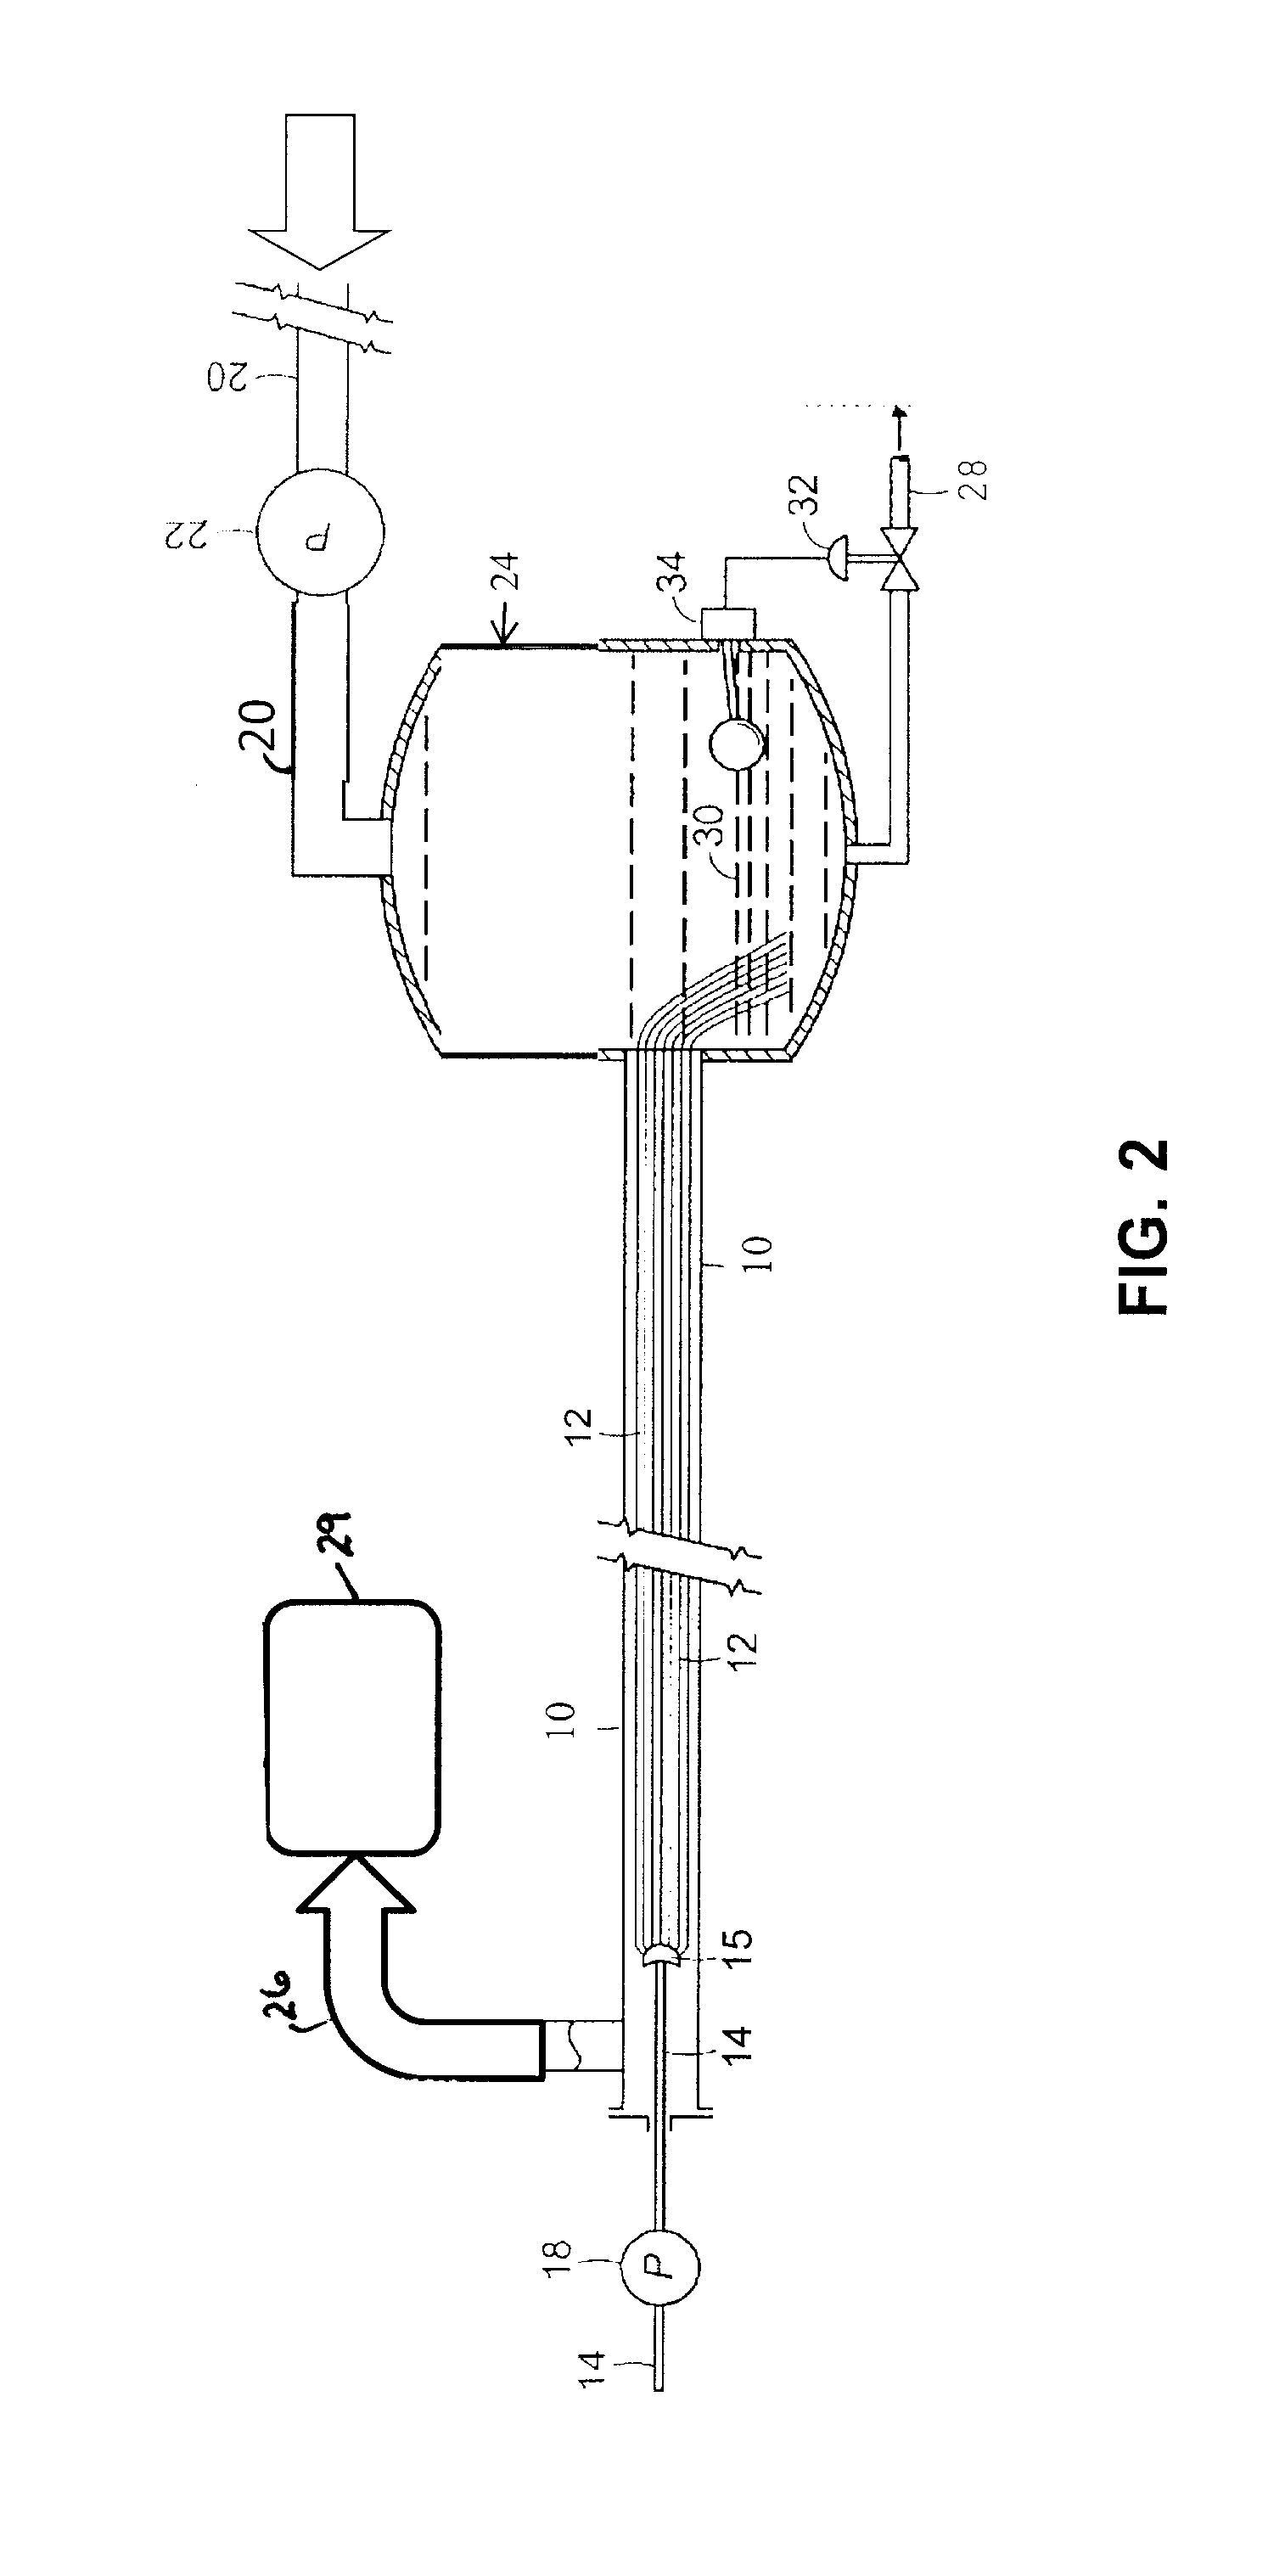 Use of a Fiber Conduit Contactor for Metal and/or Metalloid Extraction